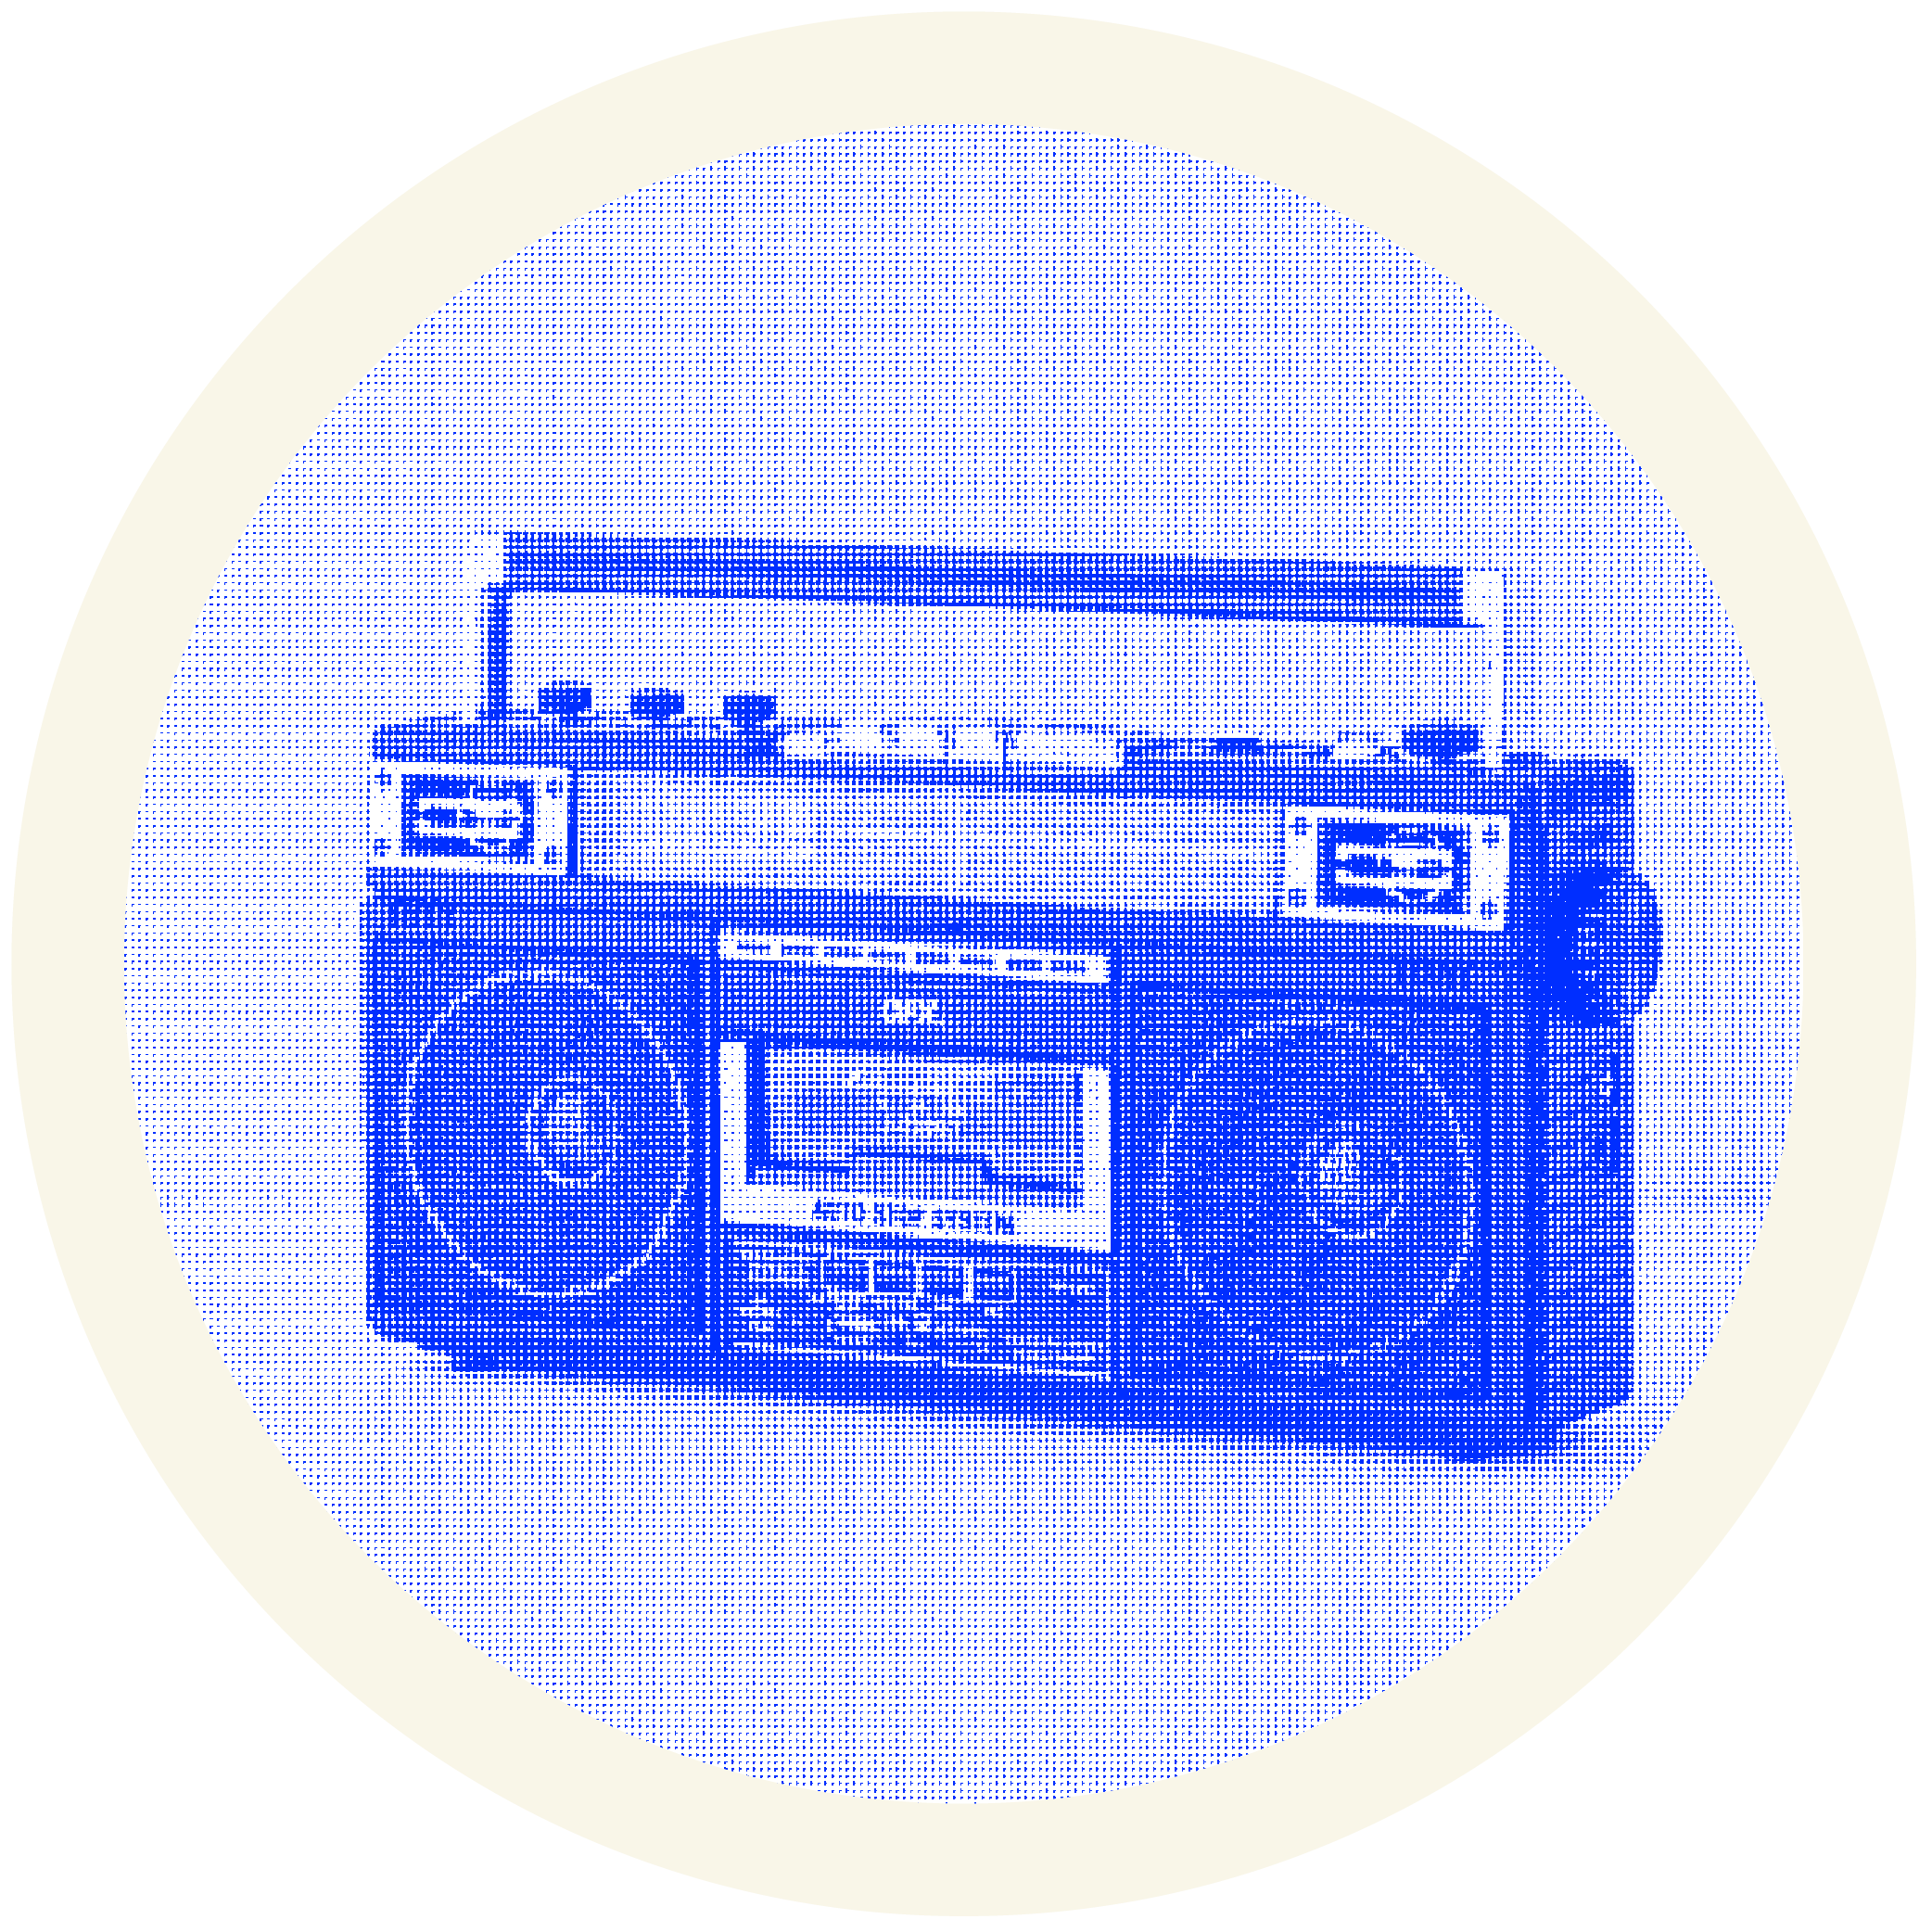 A retro boombox. SEO and content are a business' version of playing enjoyable music to a large audience.